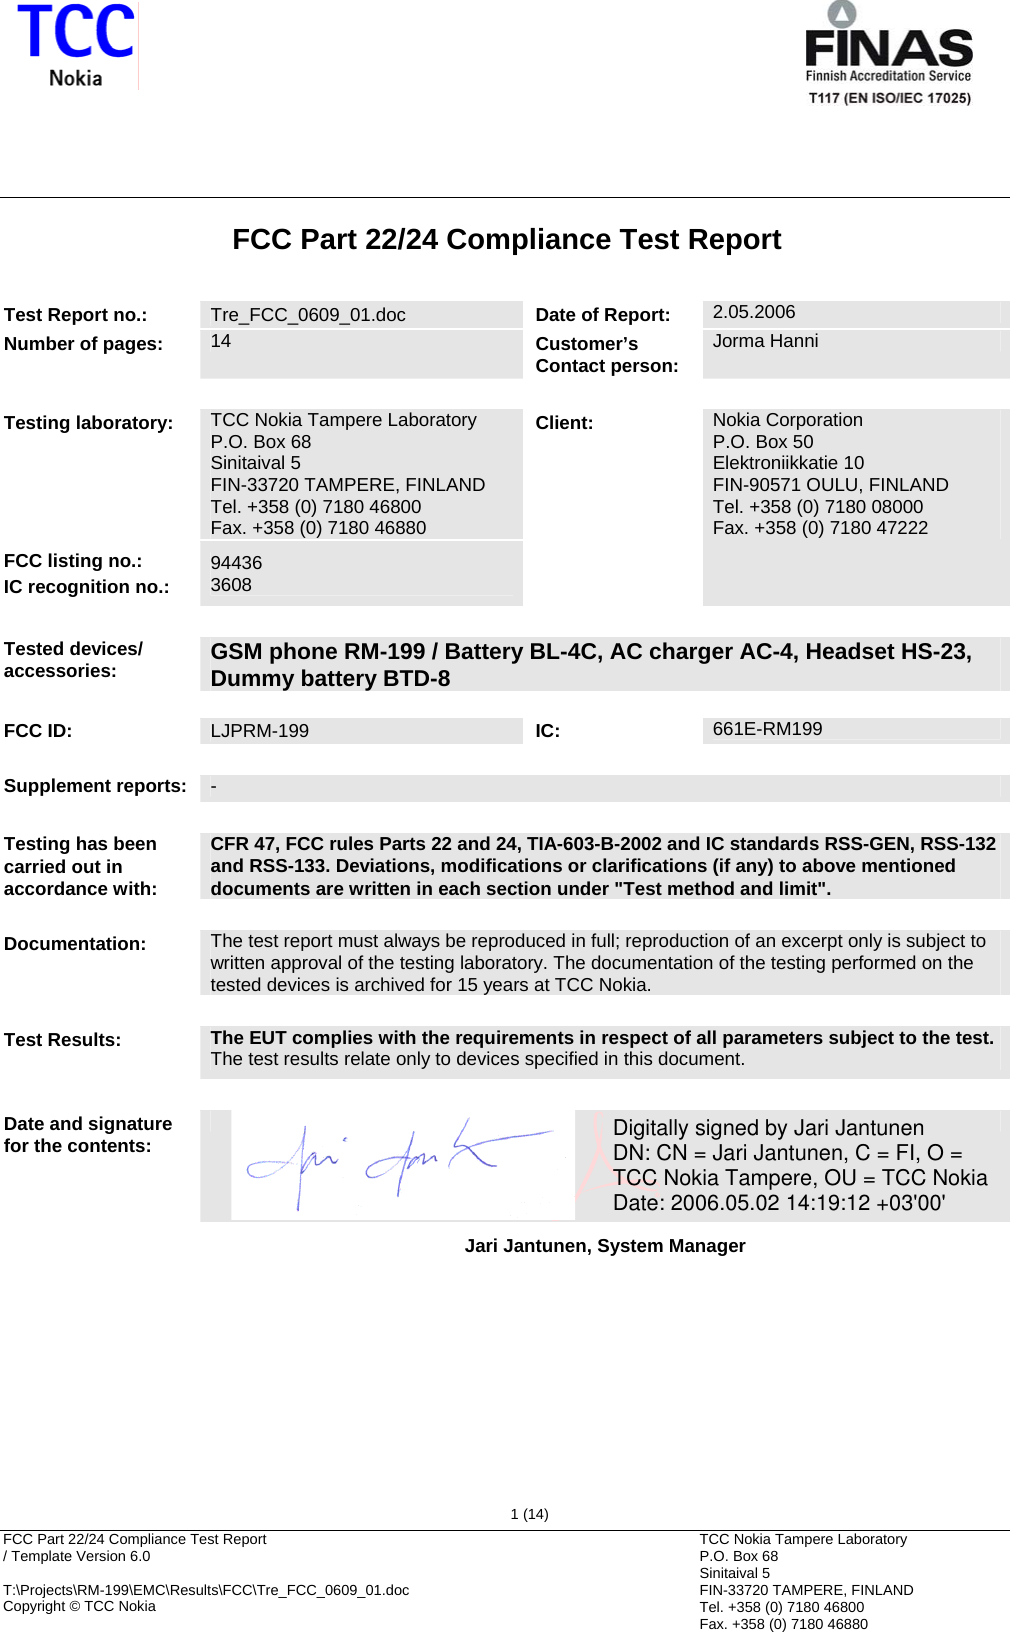       FCC Part 22/24 Compliance Test Report  / Template Version 6.0        T:\Projects\RM-199\EMC\Results\FCC\Tre_FCC_0609_01.doc Copyright © TCC Nokia  1 (14) TCC Nokia Tampere Laboratory P.O. Box 68 Sinitaival 5 FIN-33720 TAMPERE, FINLAND Tel. +358 (0) 7180 46800 Fax. +358 (0) 7180 46880 FCC Part 22/24 Compliance Test Report   Test Report no.:  Tre_FCC_0609_01.doc  Date of Report: 2.05.2006 Number of pages:  14  Customer’s Contact person: Jorma Hanni    Testing laboratory:  TCC Nokia Tampere Laboratory P.O. Box 68 Sinitaival 5 FIN-33720 TAMPERE, FINLAND Tel. +358 (0) 7180 46800 Fax. +358 (0) 7180 46880 FCC listing no.: IC recognition no.: 94436 3608 Client: Nokia Corporation P.O. Box 50 Elektroniikkatie 10 FIN-90571 OULU, FINLAND Tel. +358 (0) 7180 08000 Fax. +358 (0) 7180 47222   Tested devices/ accessories:  GSM phone RM-199 / Battery BL-4C, AC charger AC-4, Headset HS-23, Dummy battery BTD-8  FCC ID:  LJPRM-199  IC: 661E-RM199   Supplement reports:  -   Testing has been carried out in accordance with: CFR 47, FCC rules Parts 22 and 24, TIA-603-B-2002 and IC standards RSS-GEN, RSS-132 and RSS-133. Deviations, modifications or clarifications (if any) to above mentioned documents are written in each section under &quot;Test method and limit&quot;.   Documentation:  The test report must always be reproduced in full; reproduction of an excerpt only is subject to written approval of the testing laboratory. The documentation of the testing performed on the tested devices is archived for 15 years at TCC Nokia.   Test Results:  The EUT complies with the requirements in respect of all parameters subject to the test. The test results relate only to devices specified in this document.   Date and signature for the contents:    Jari Jantunen, System Manager      Digitally signed by Jari JantunenDN: CN = Jari Jantunen, C = FI, O = TCC Nokia Tampere, OU = TCC NokiaDate: 2006.05.02 14:19:12 +03&apos;00&apos;